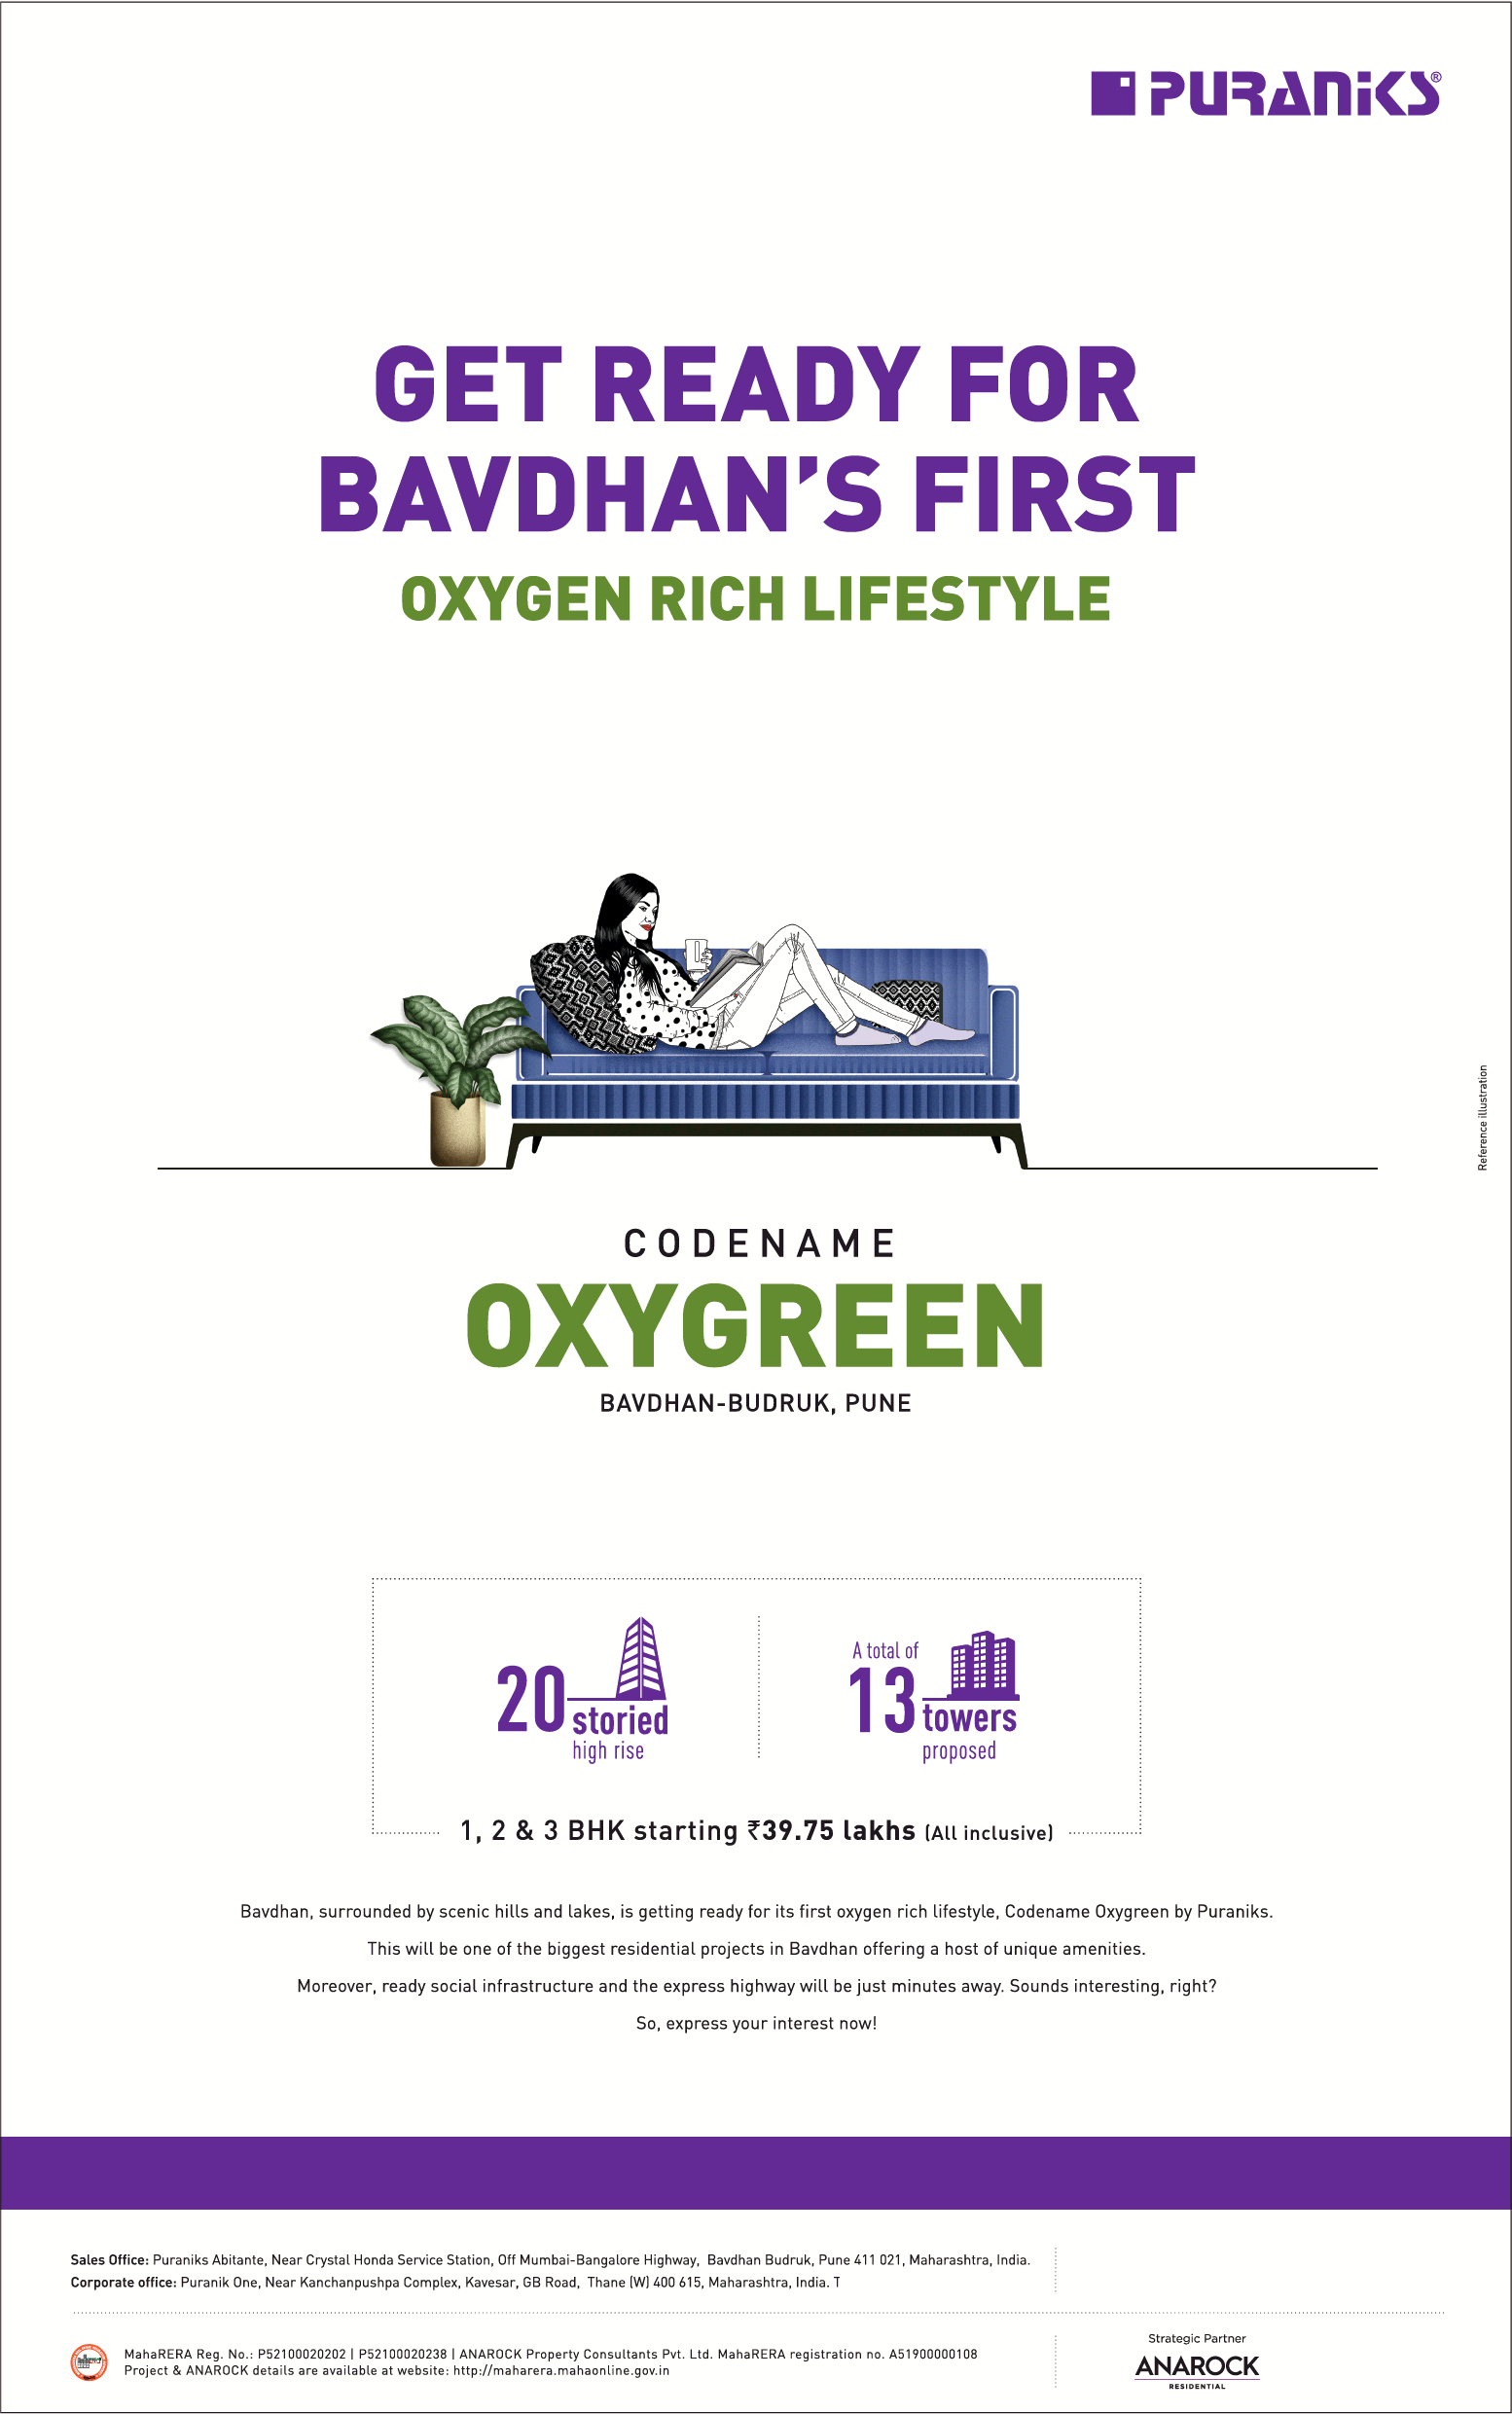 Book 1, 2 & 3 BHK starting Rs 39.75 Lac (all inclusive) at Puraniks Codename Oxygreen, Pune